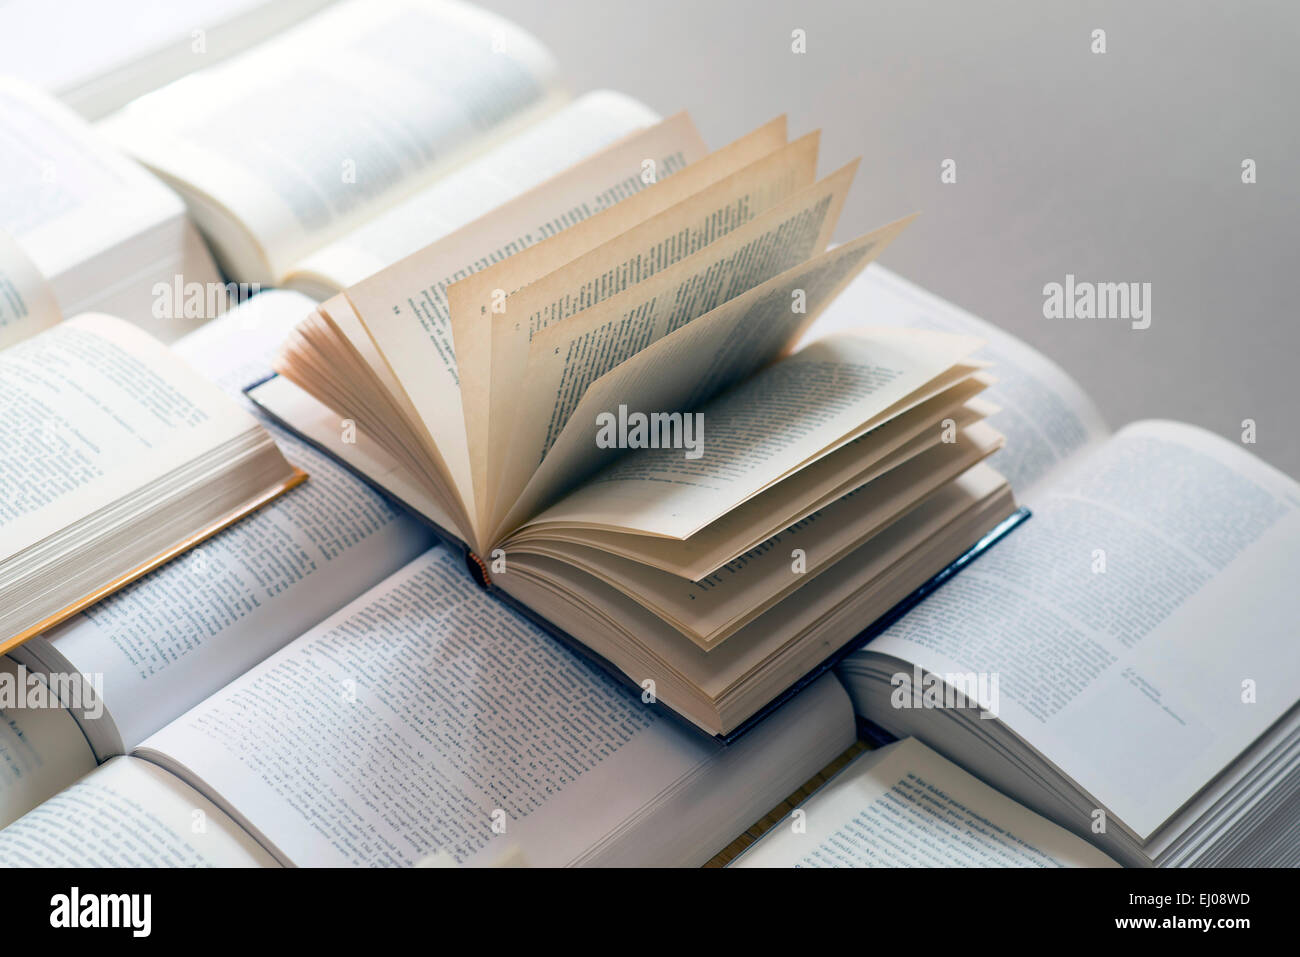 Many open books piled up. unreadable text. Copy space Stock Photo